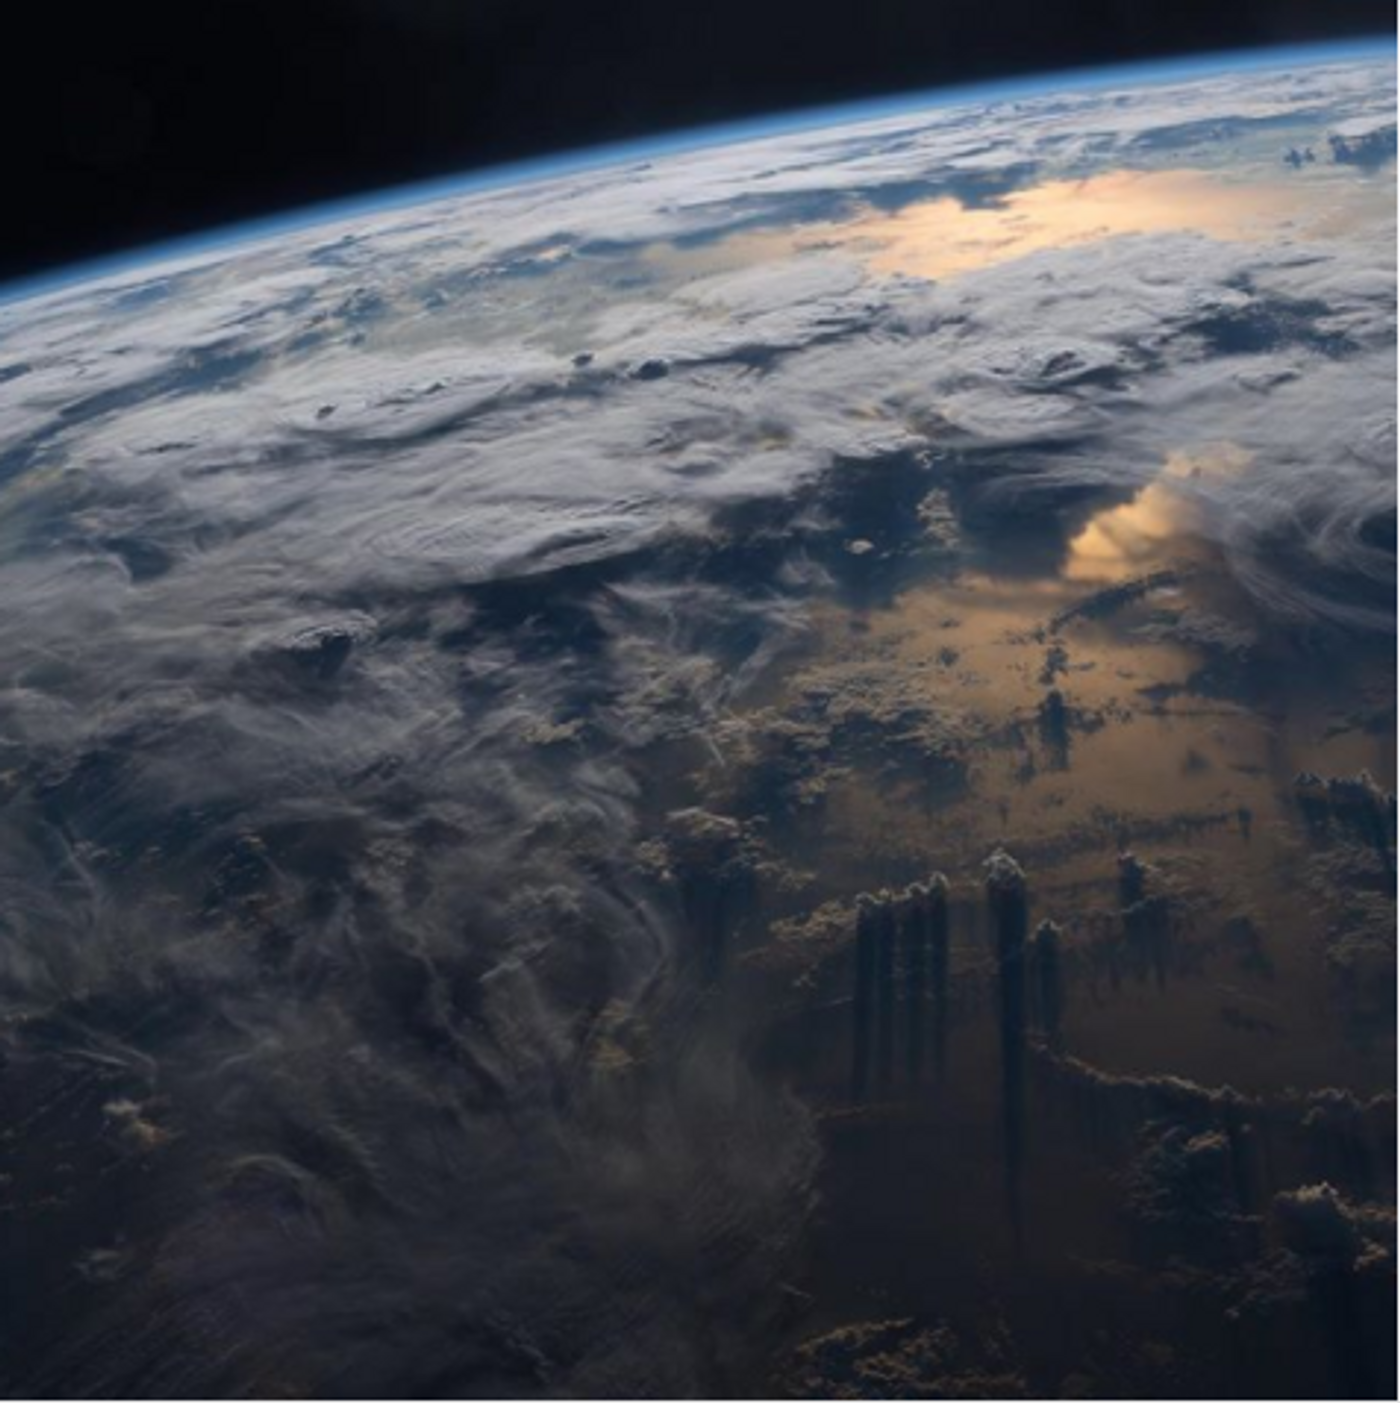 Earth from ISS, credit: ISS on Instagram